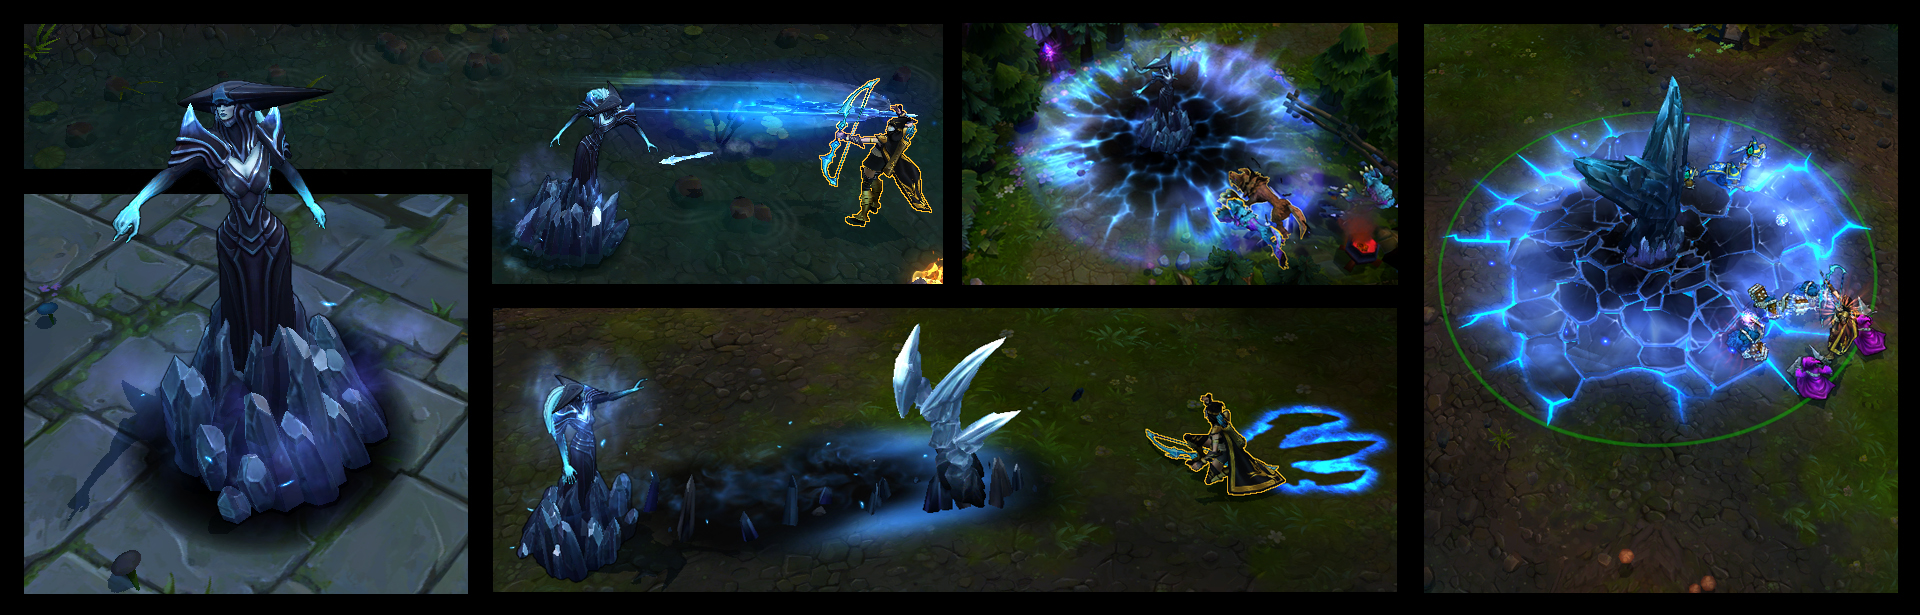 Lissandra Gallery In Game Screenshots Leaguepedia League Of Legends Esports Wiki